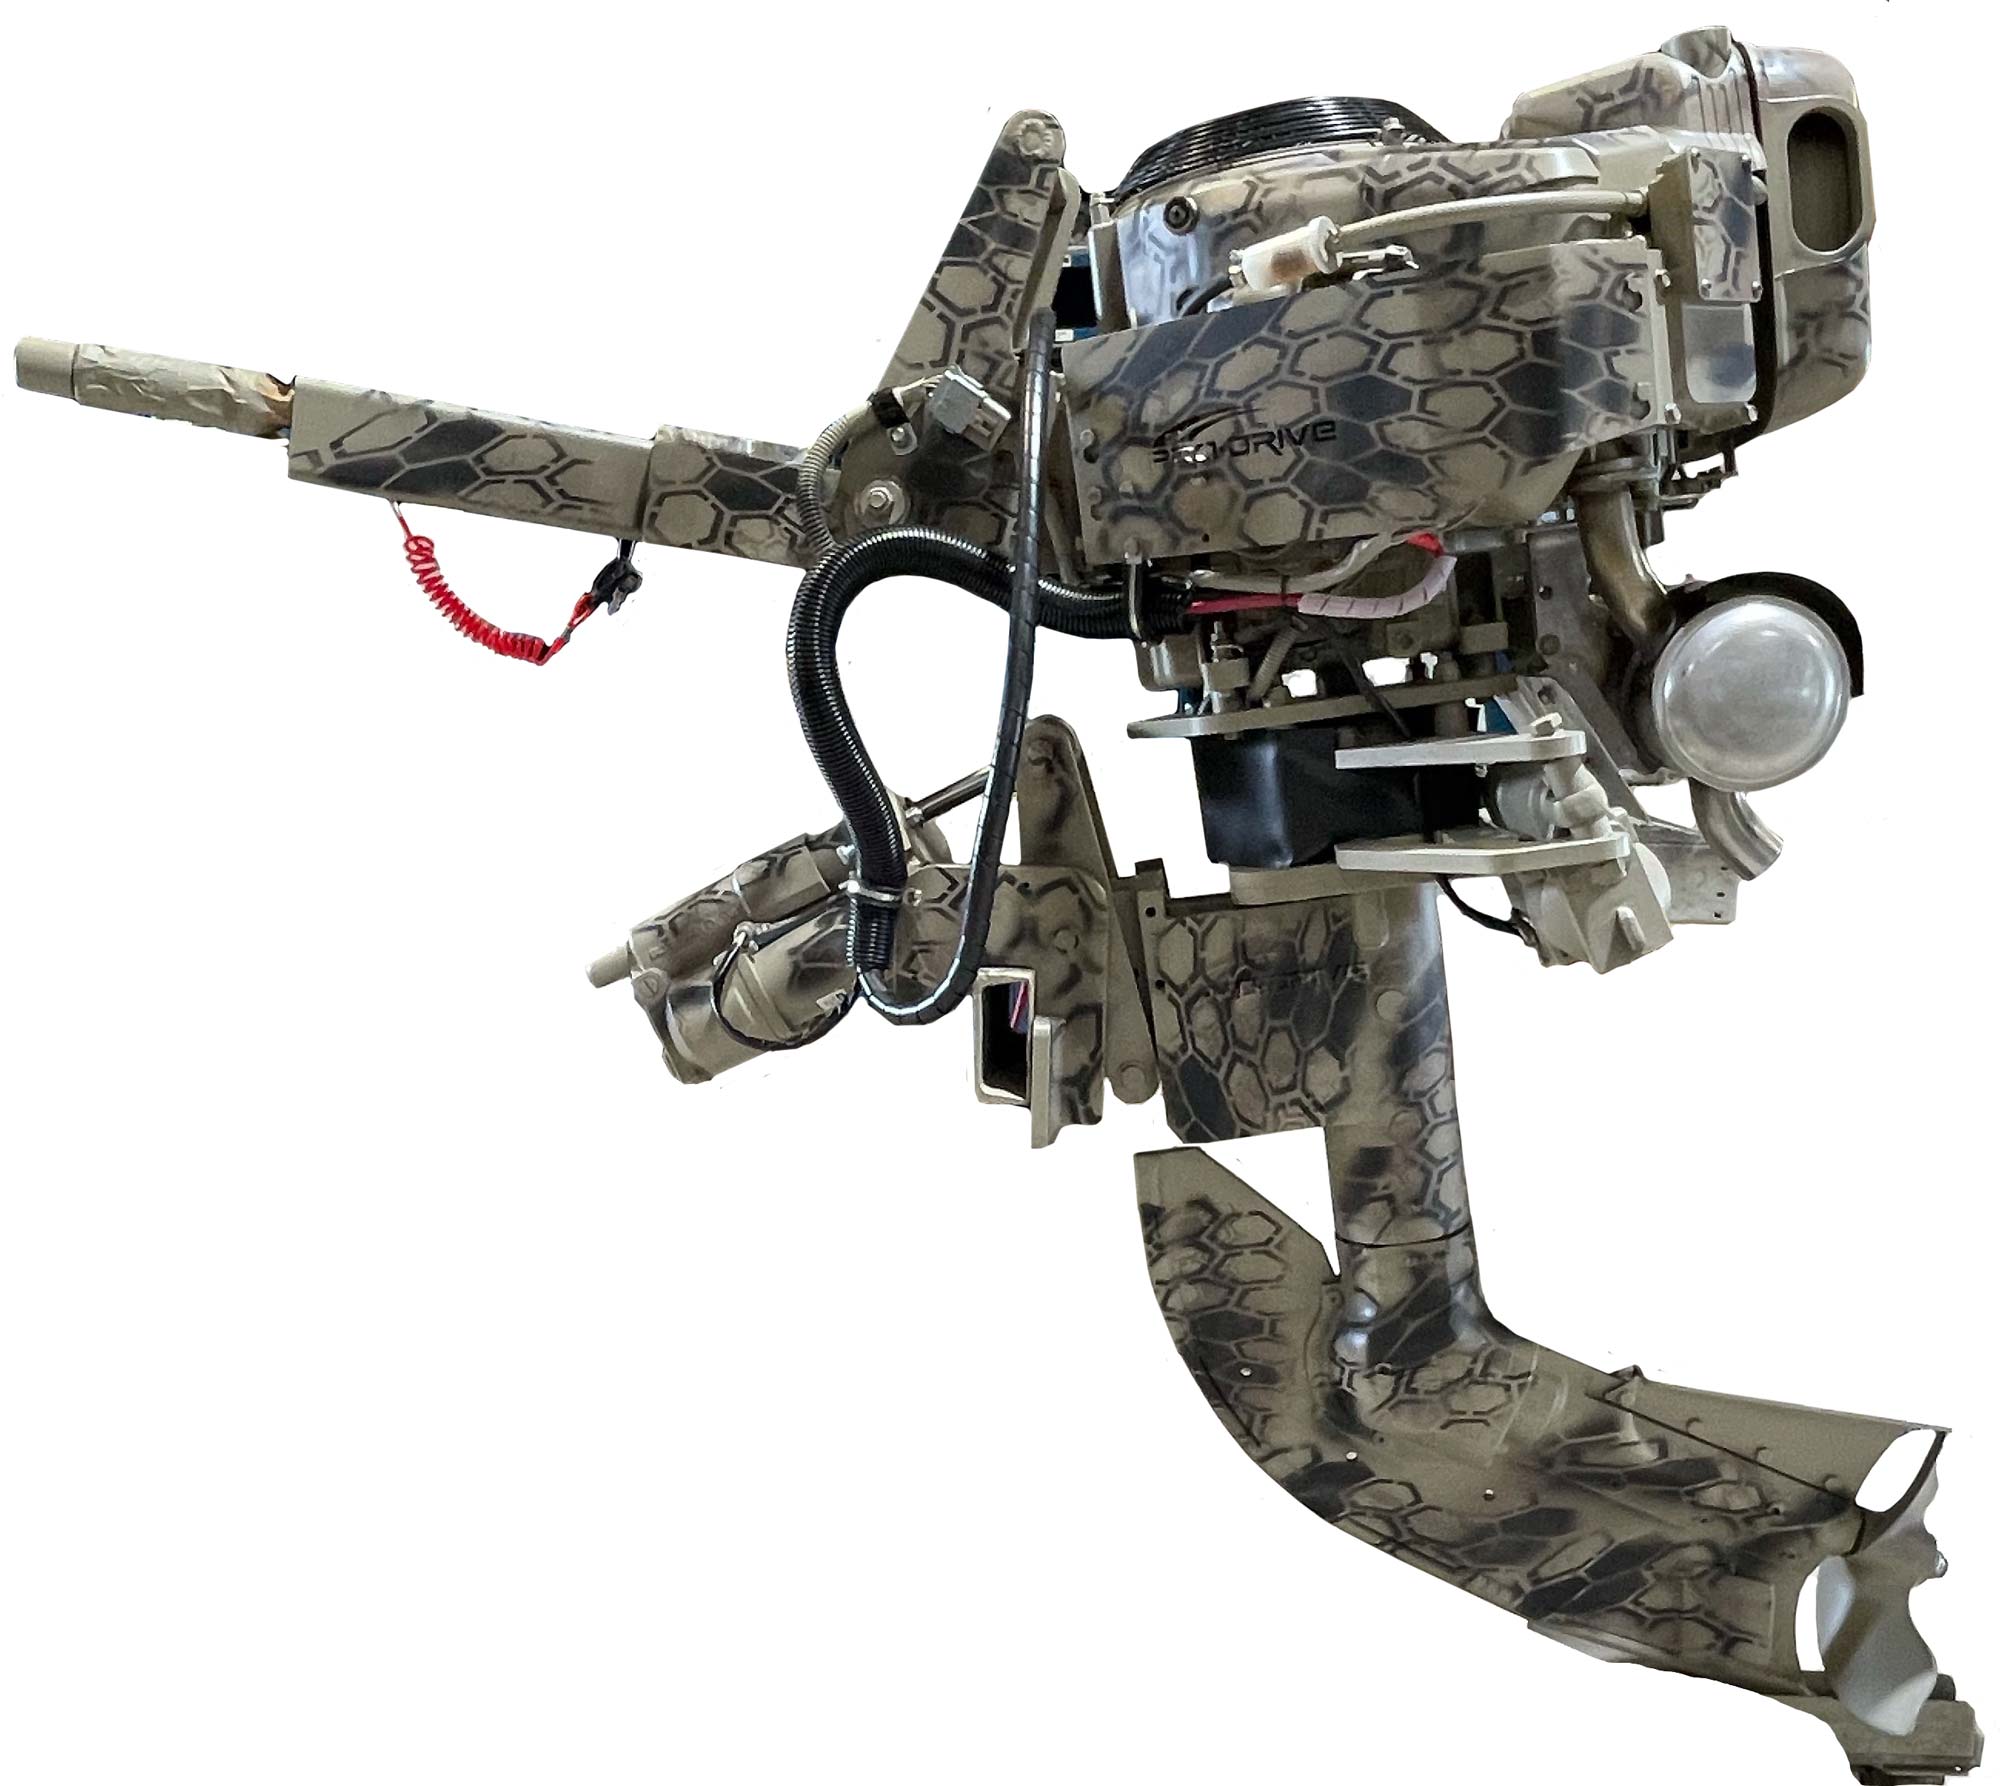 Hex Camo shallow water outboard